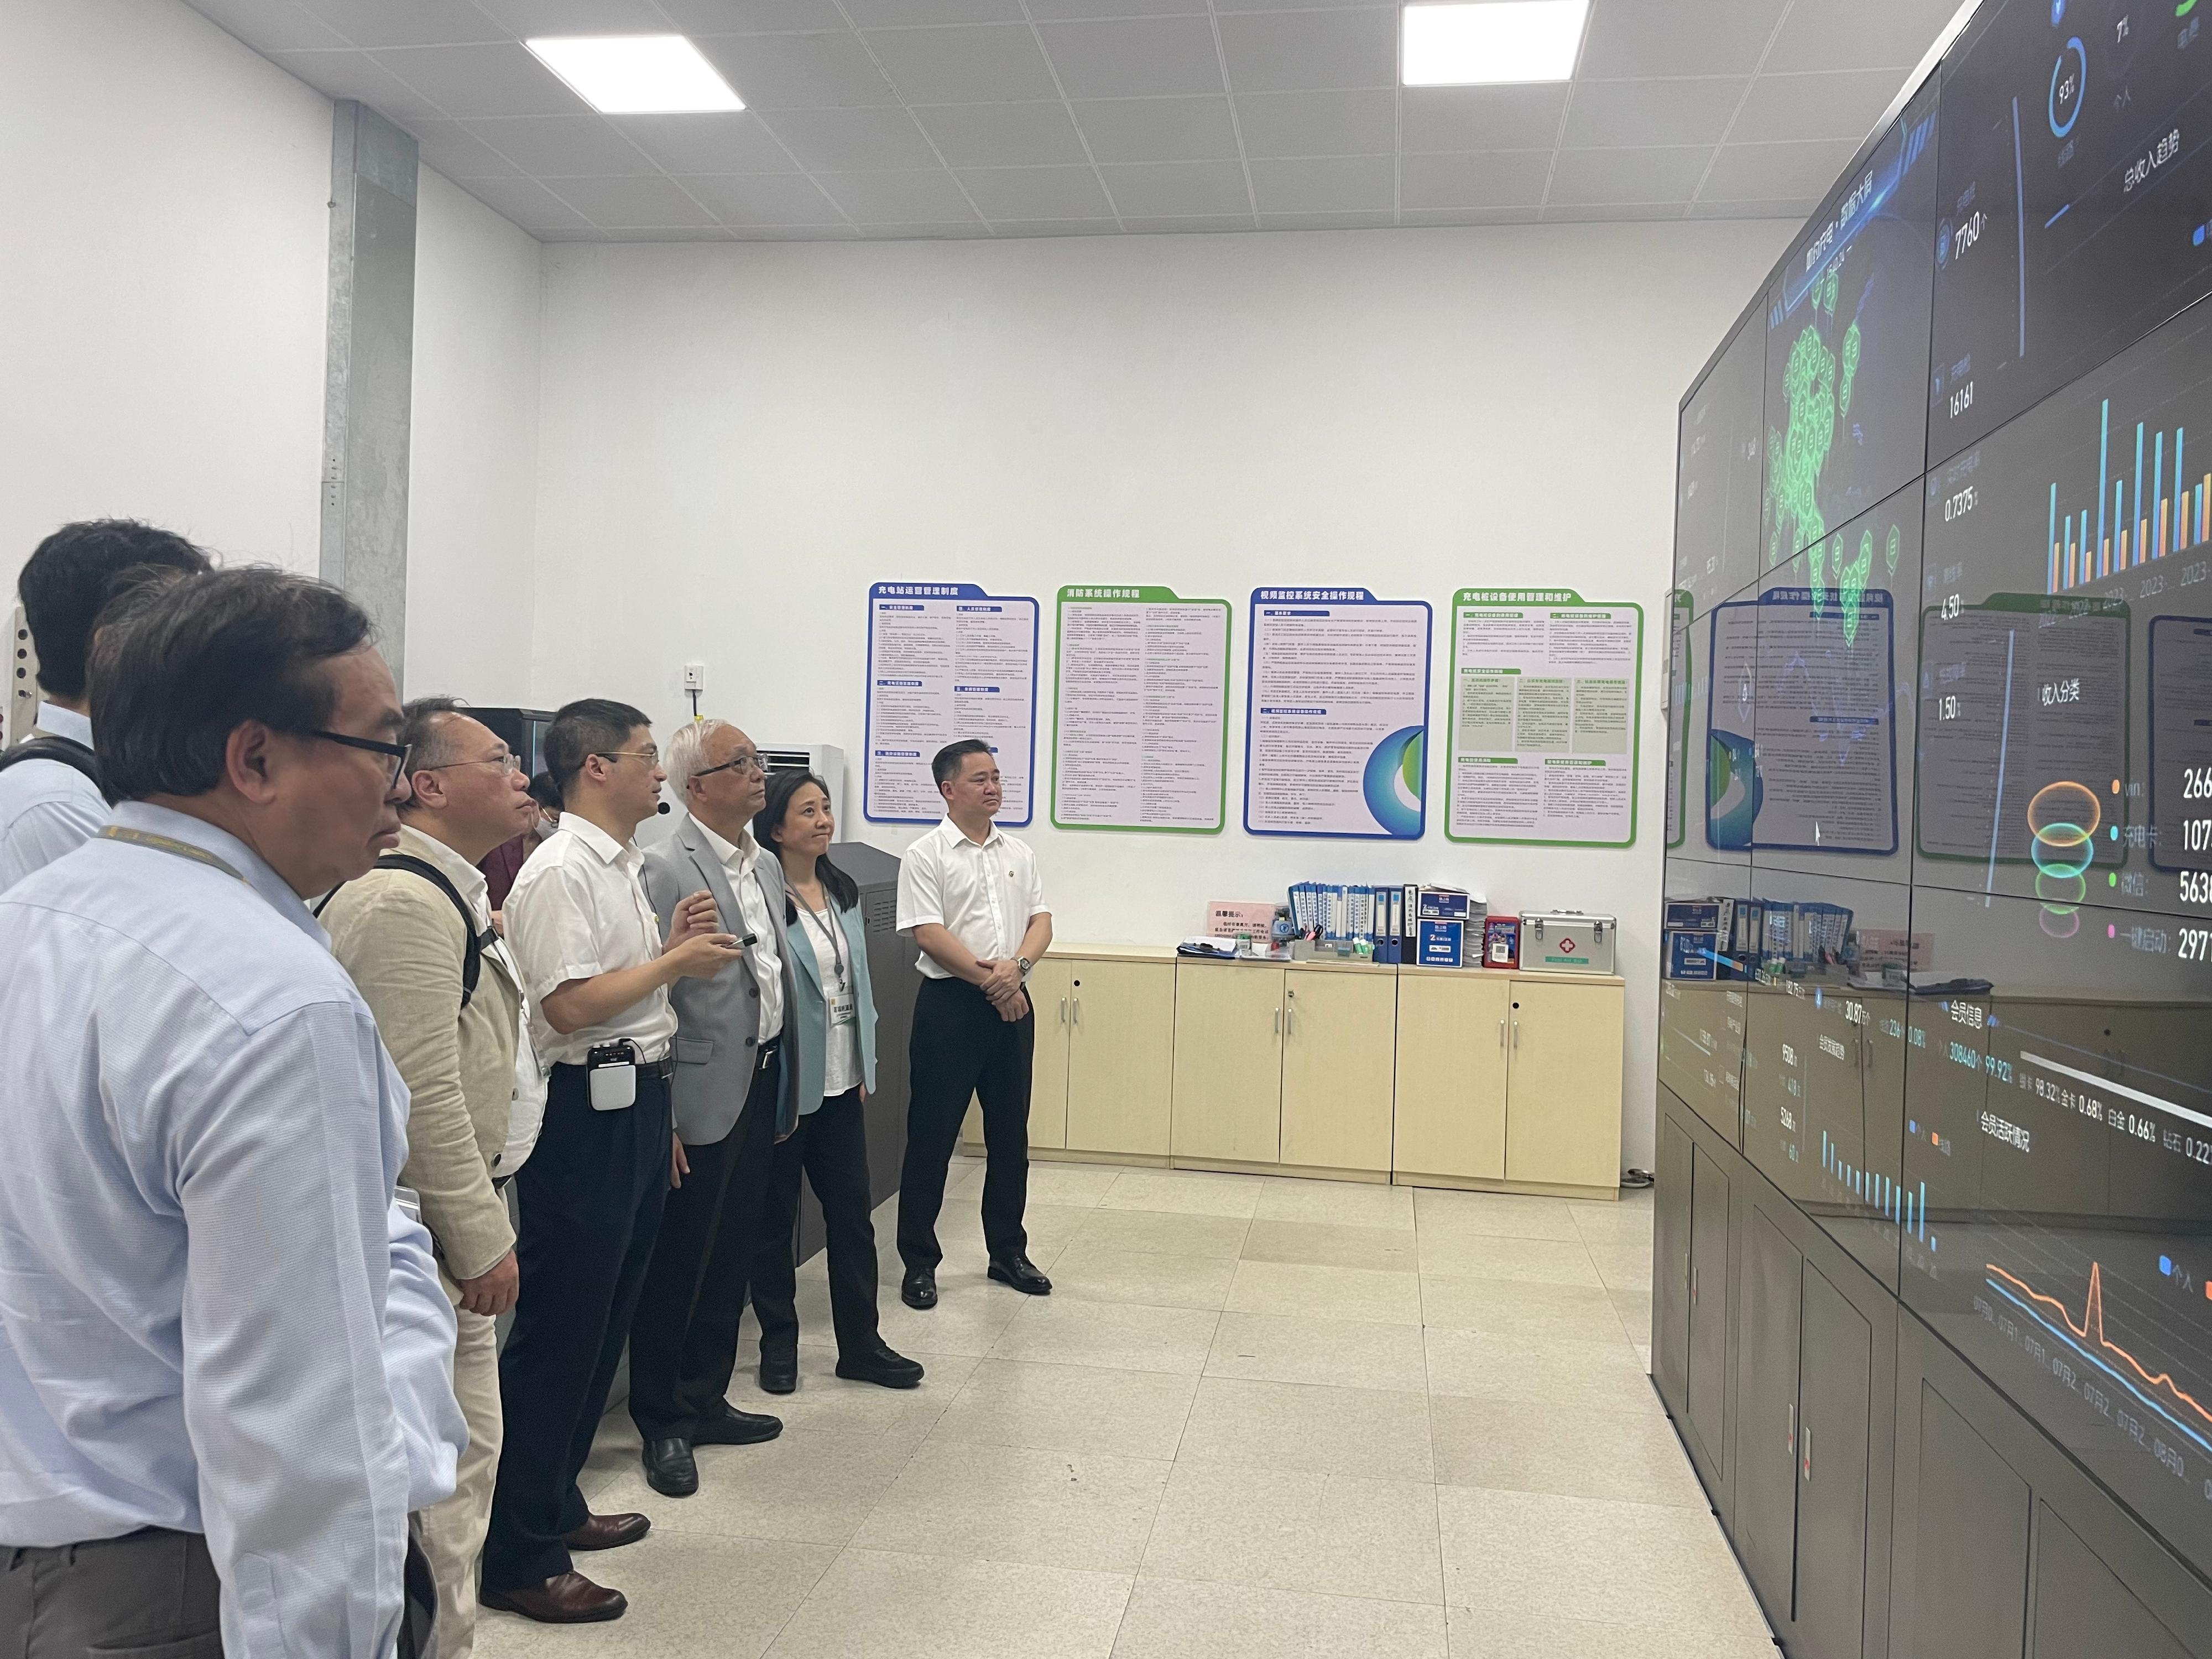 The Secretary for Environment and Ecology, Mr Tse Chin-wan, together with the Legislative Council Panel on Environmental Affairs, visited the Yanling new energy eco-industrial park and Guangzhou public transport command center of the Guangzhou Public Transport Group this afternoon (August 7). Photo shows Mr Tse (third right), and the delegation of the Legislative Council Panel on Environmental Affairs, receiving a briefing from a representative on their traffic control and surveillance system.